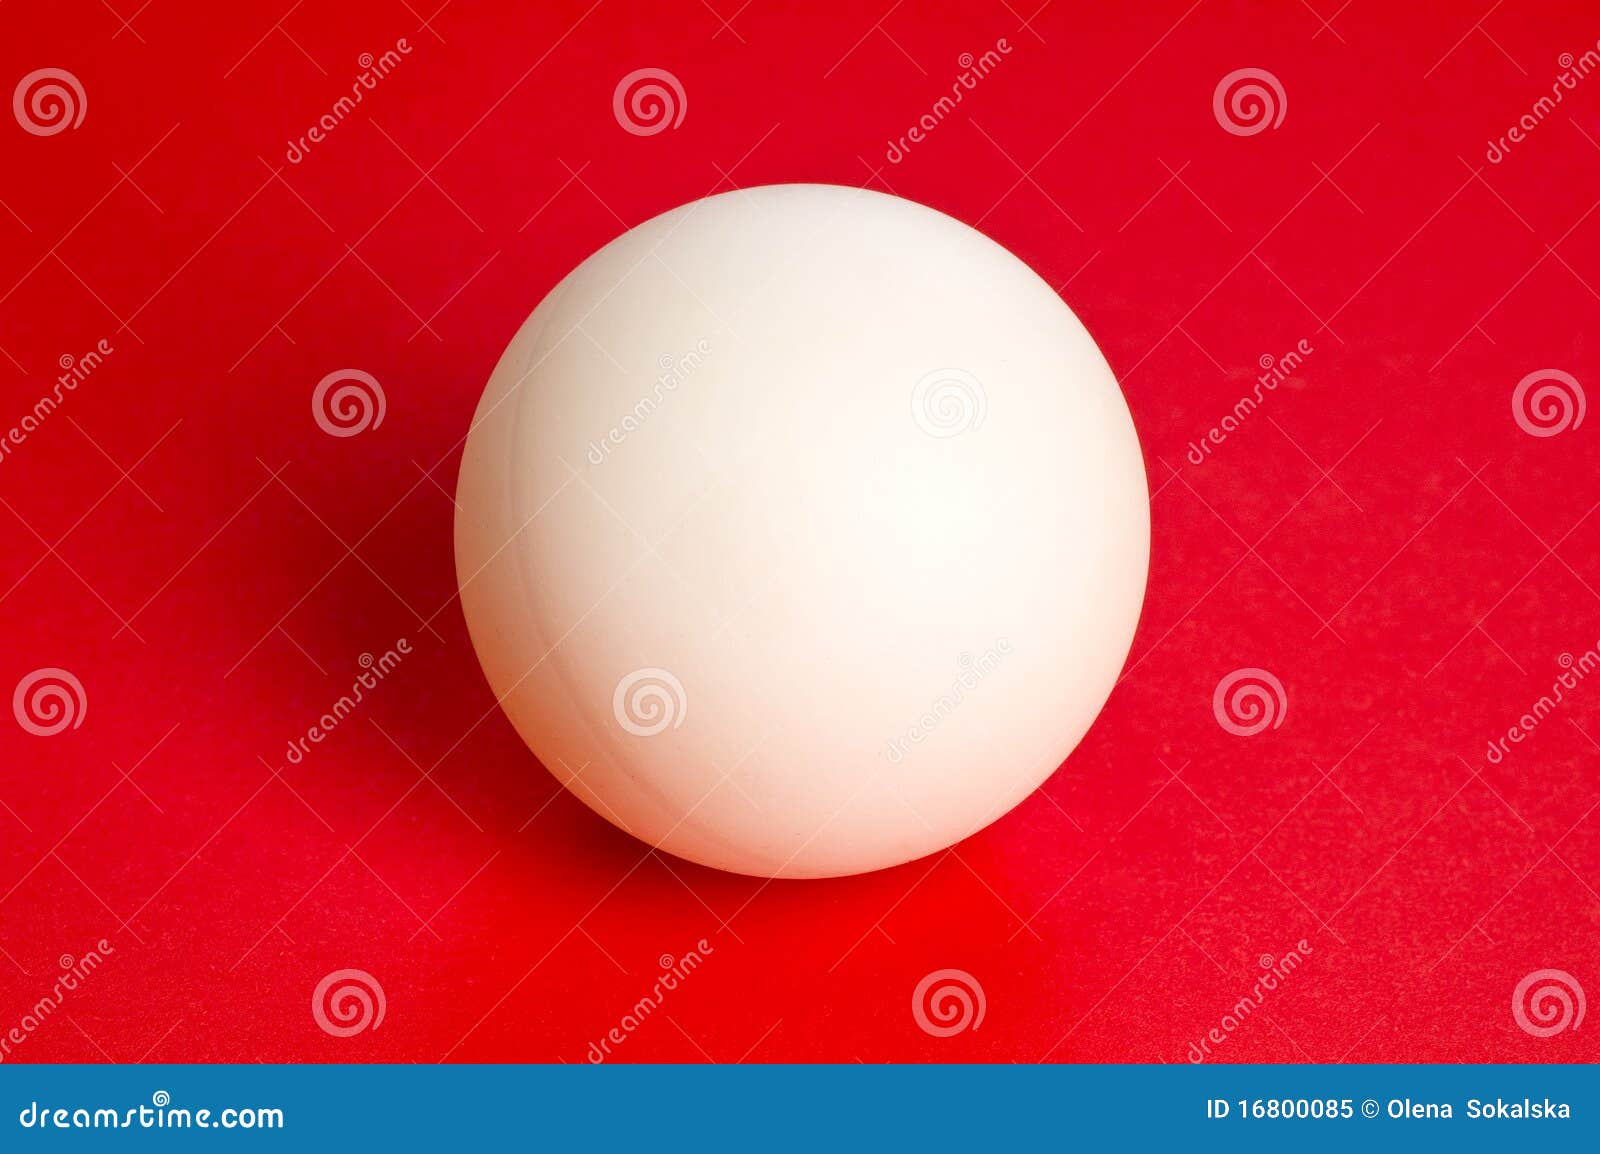 Ping-pong ball. White sphere ball on red